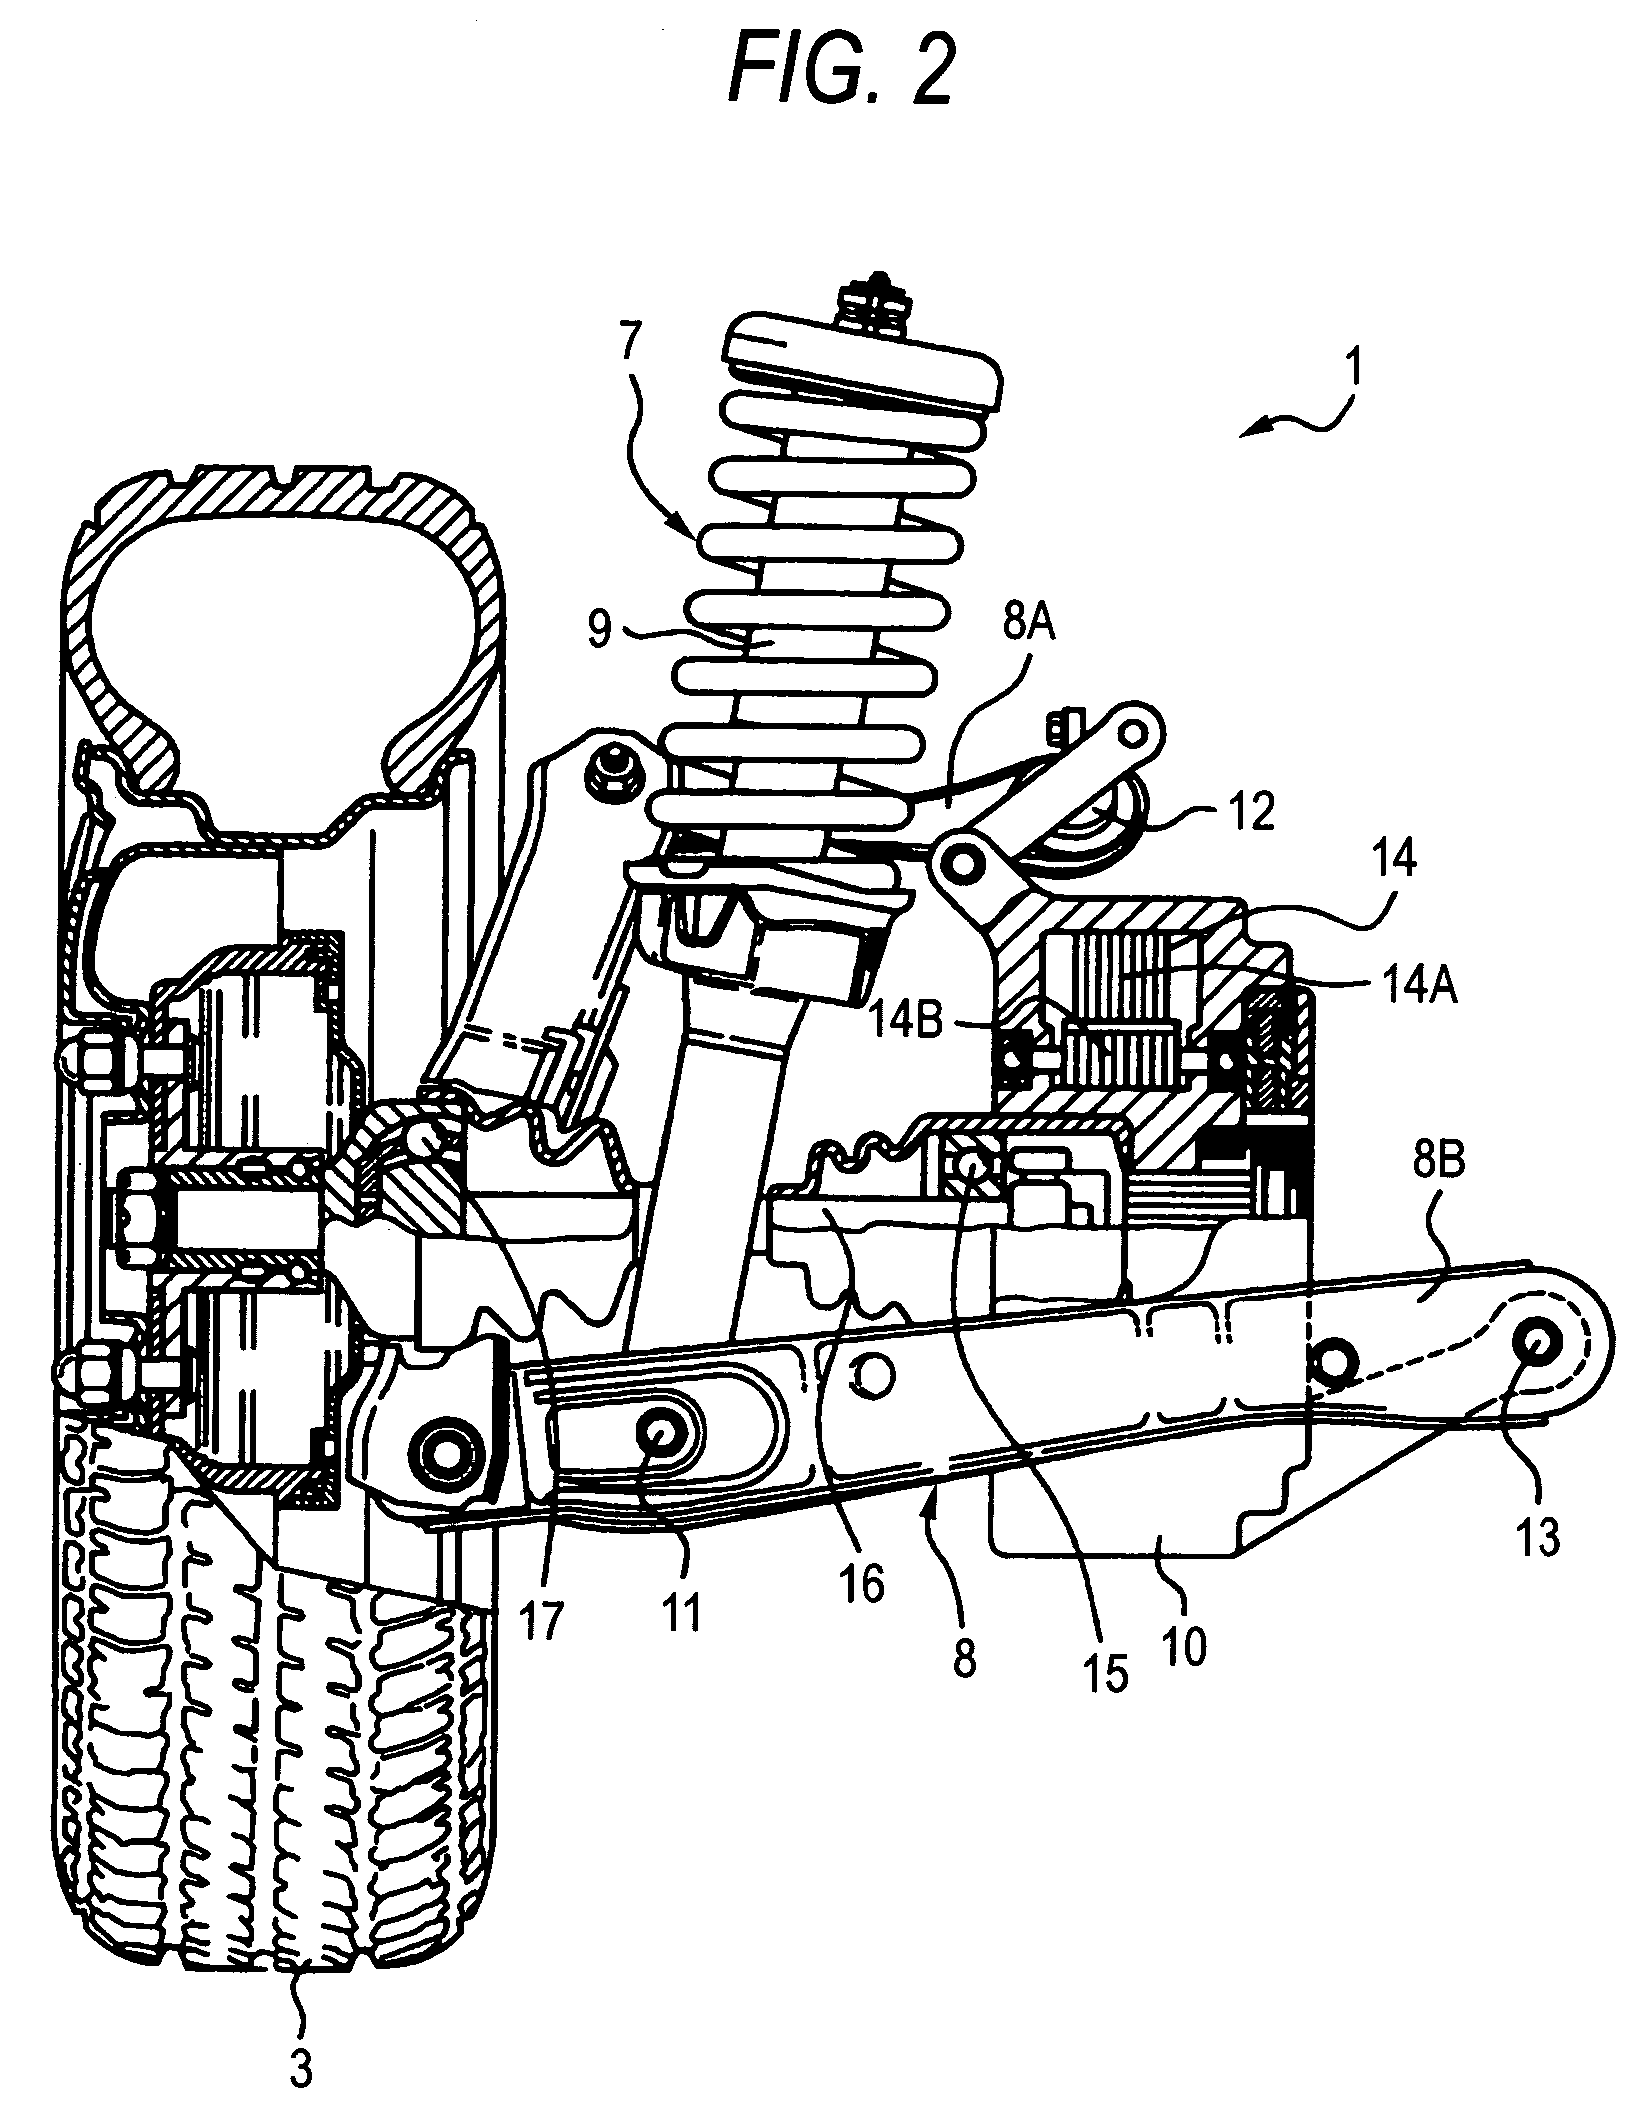 Vehicle with electric motors